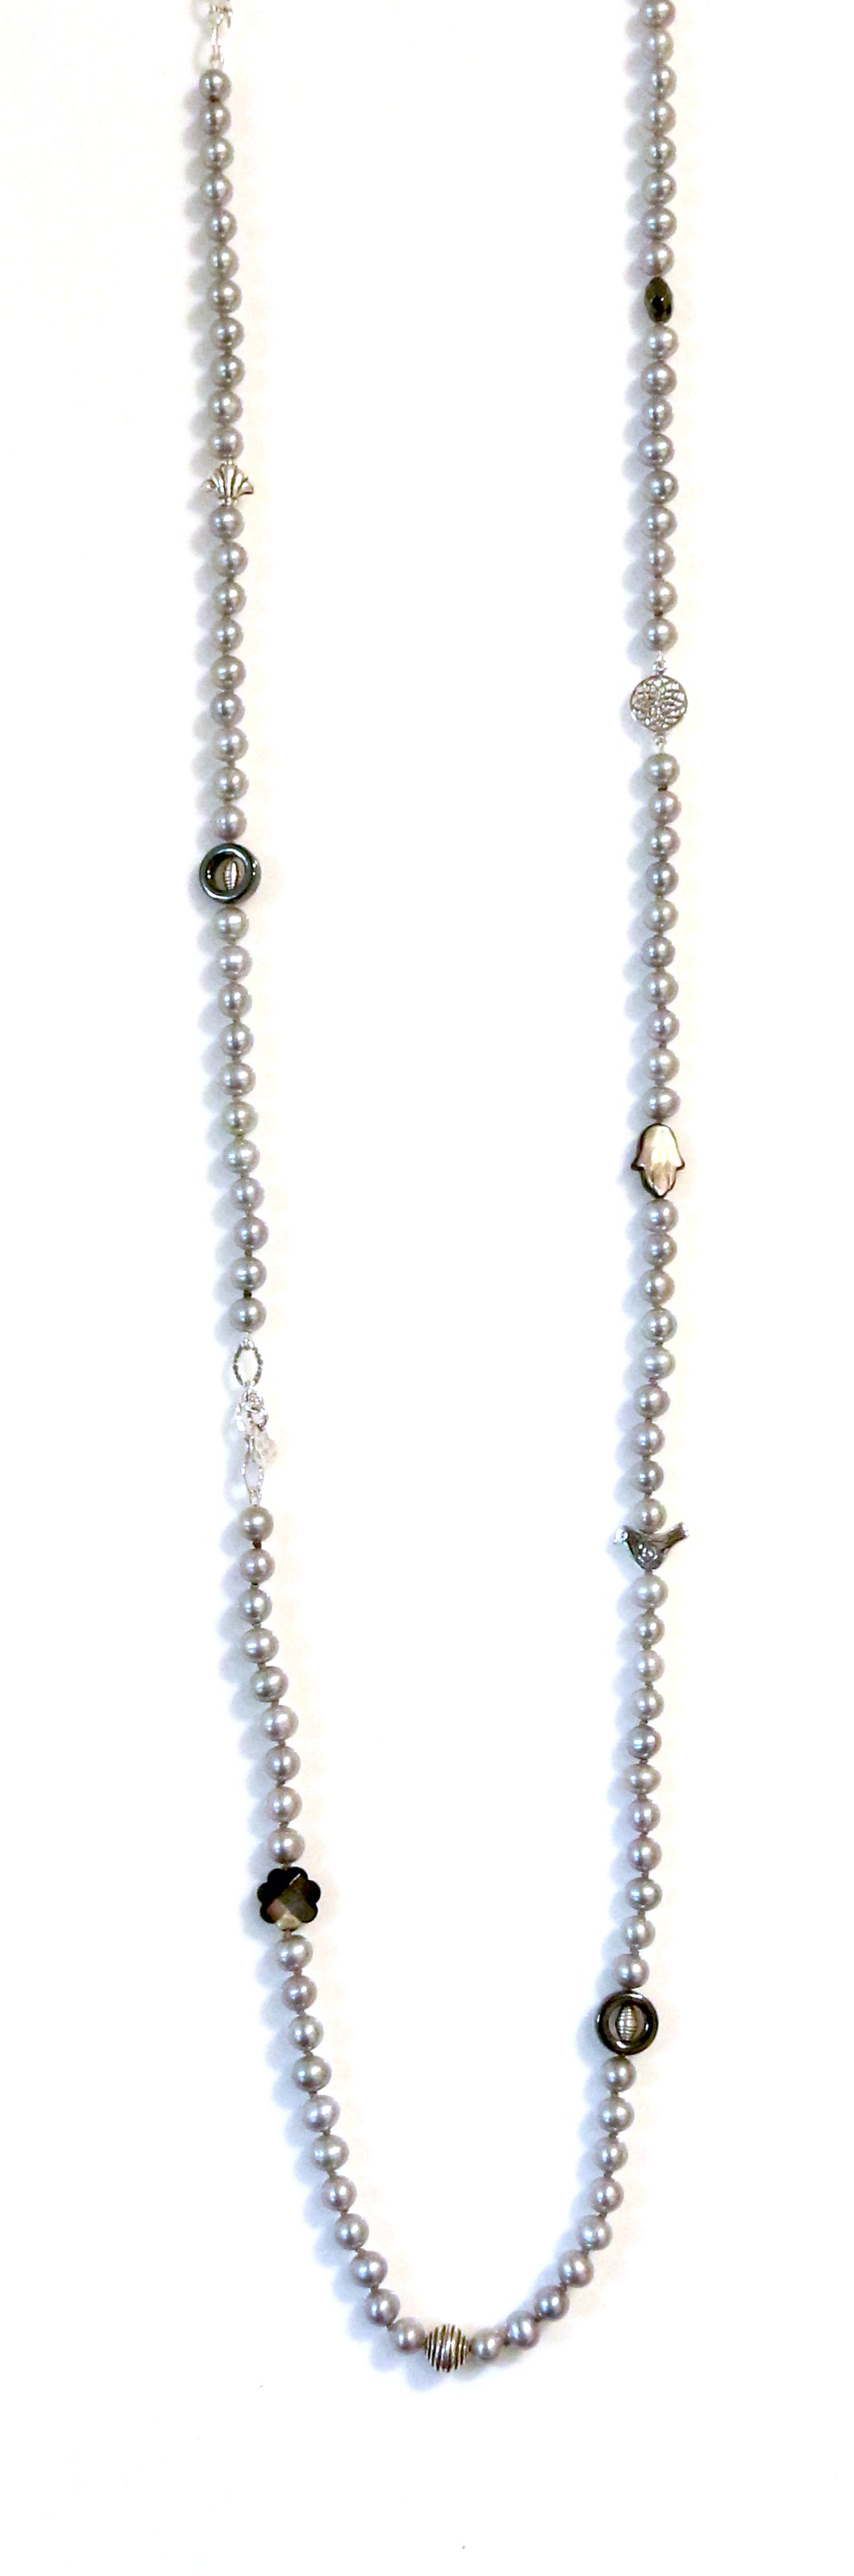 Australian Handmade Grey Necklace with Pearls Mother of Pearl Hematite and Sterling Silver